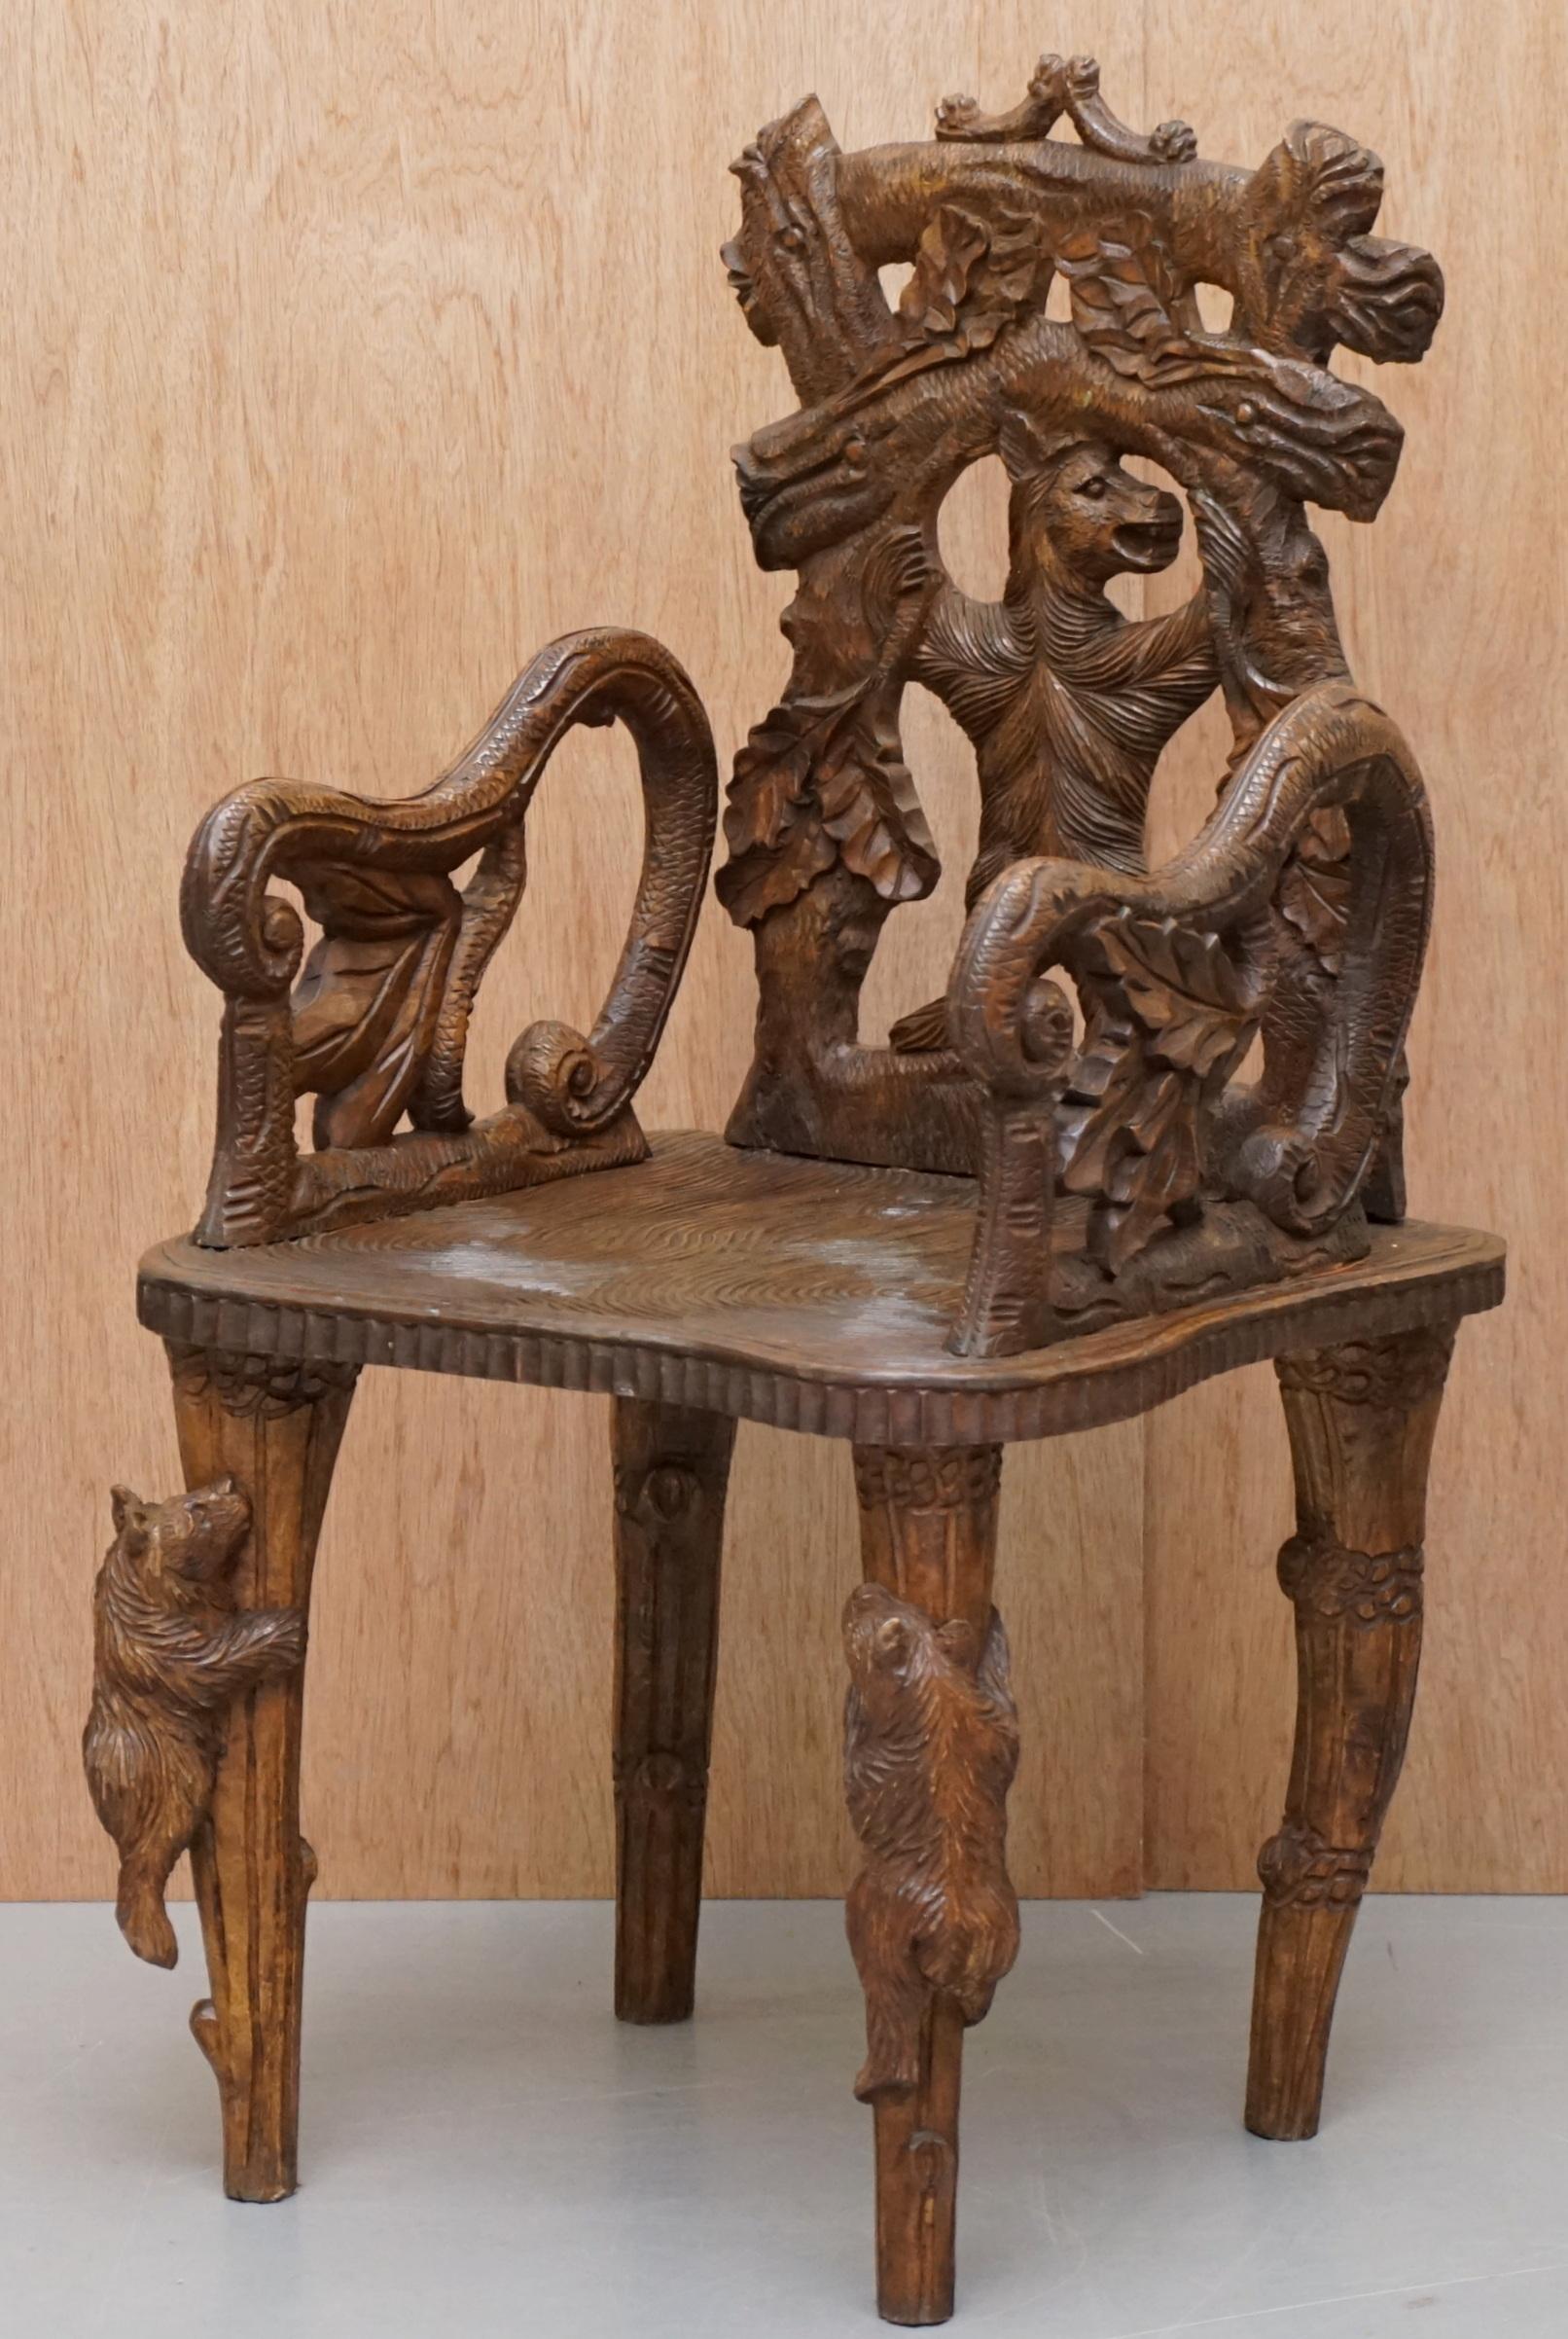 German Vintage Hand Carved Black Forest Wood Bear Armchair with Bears Climbing the Legs